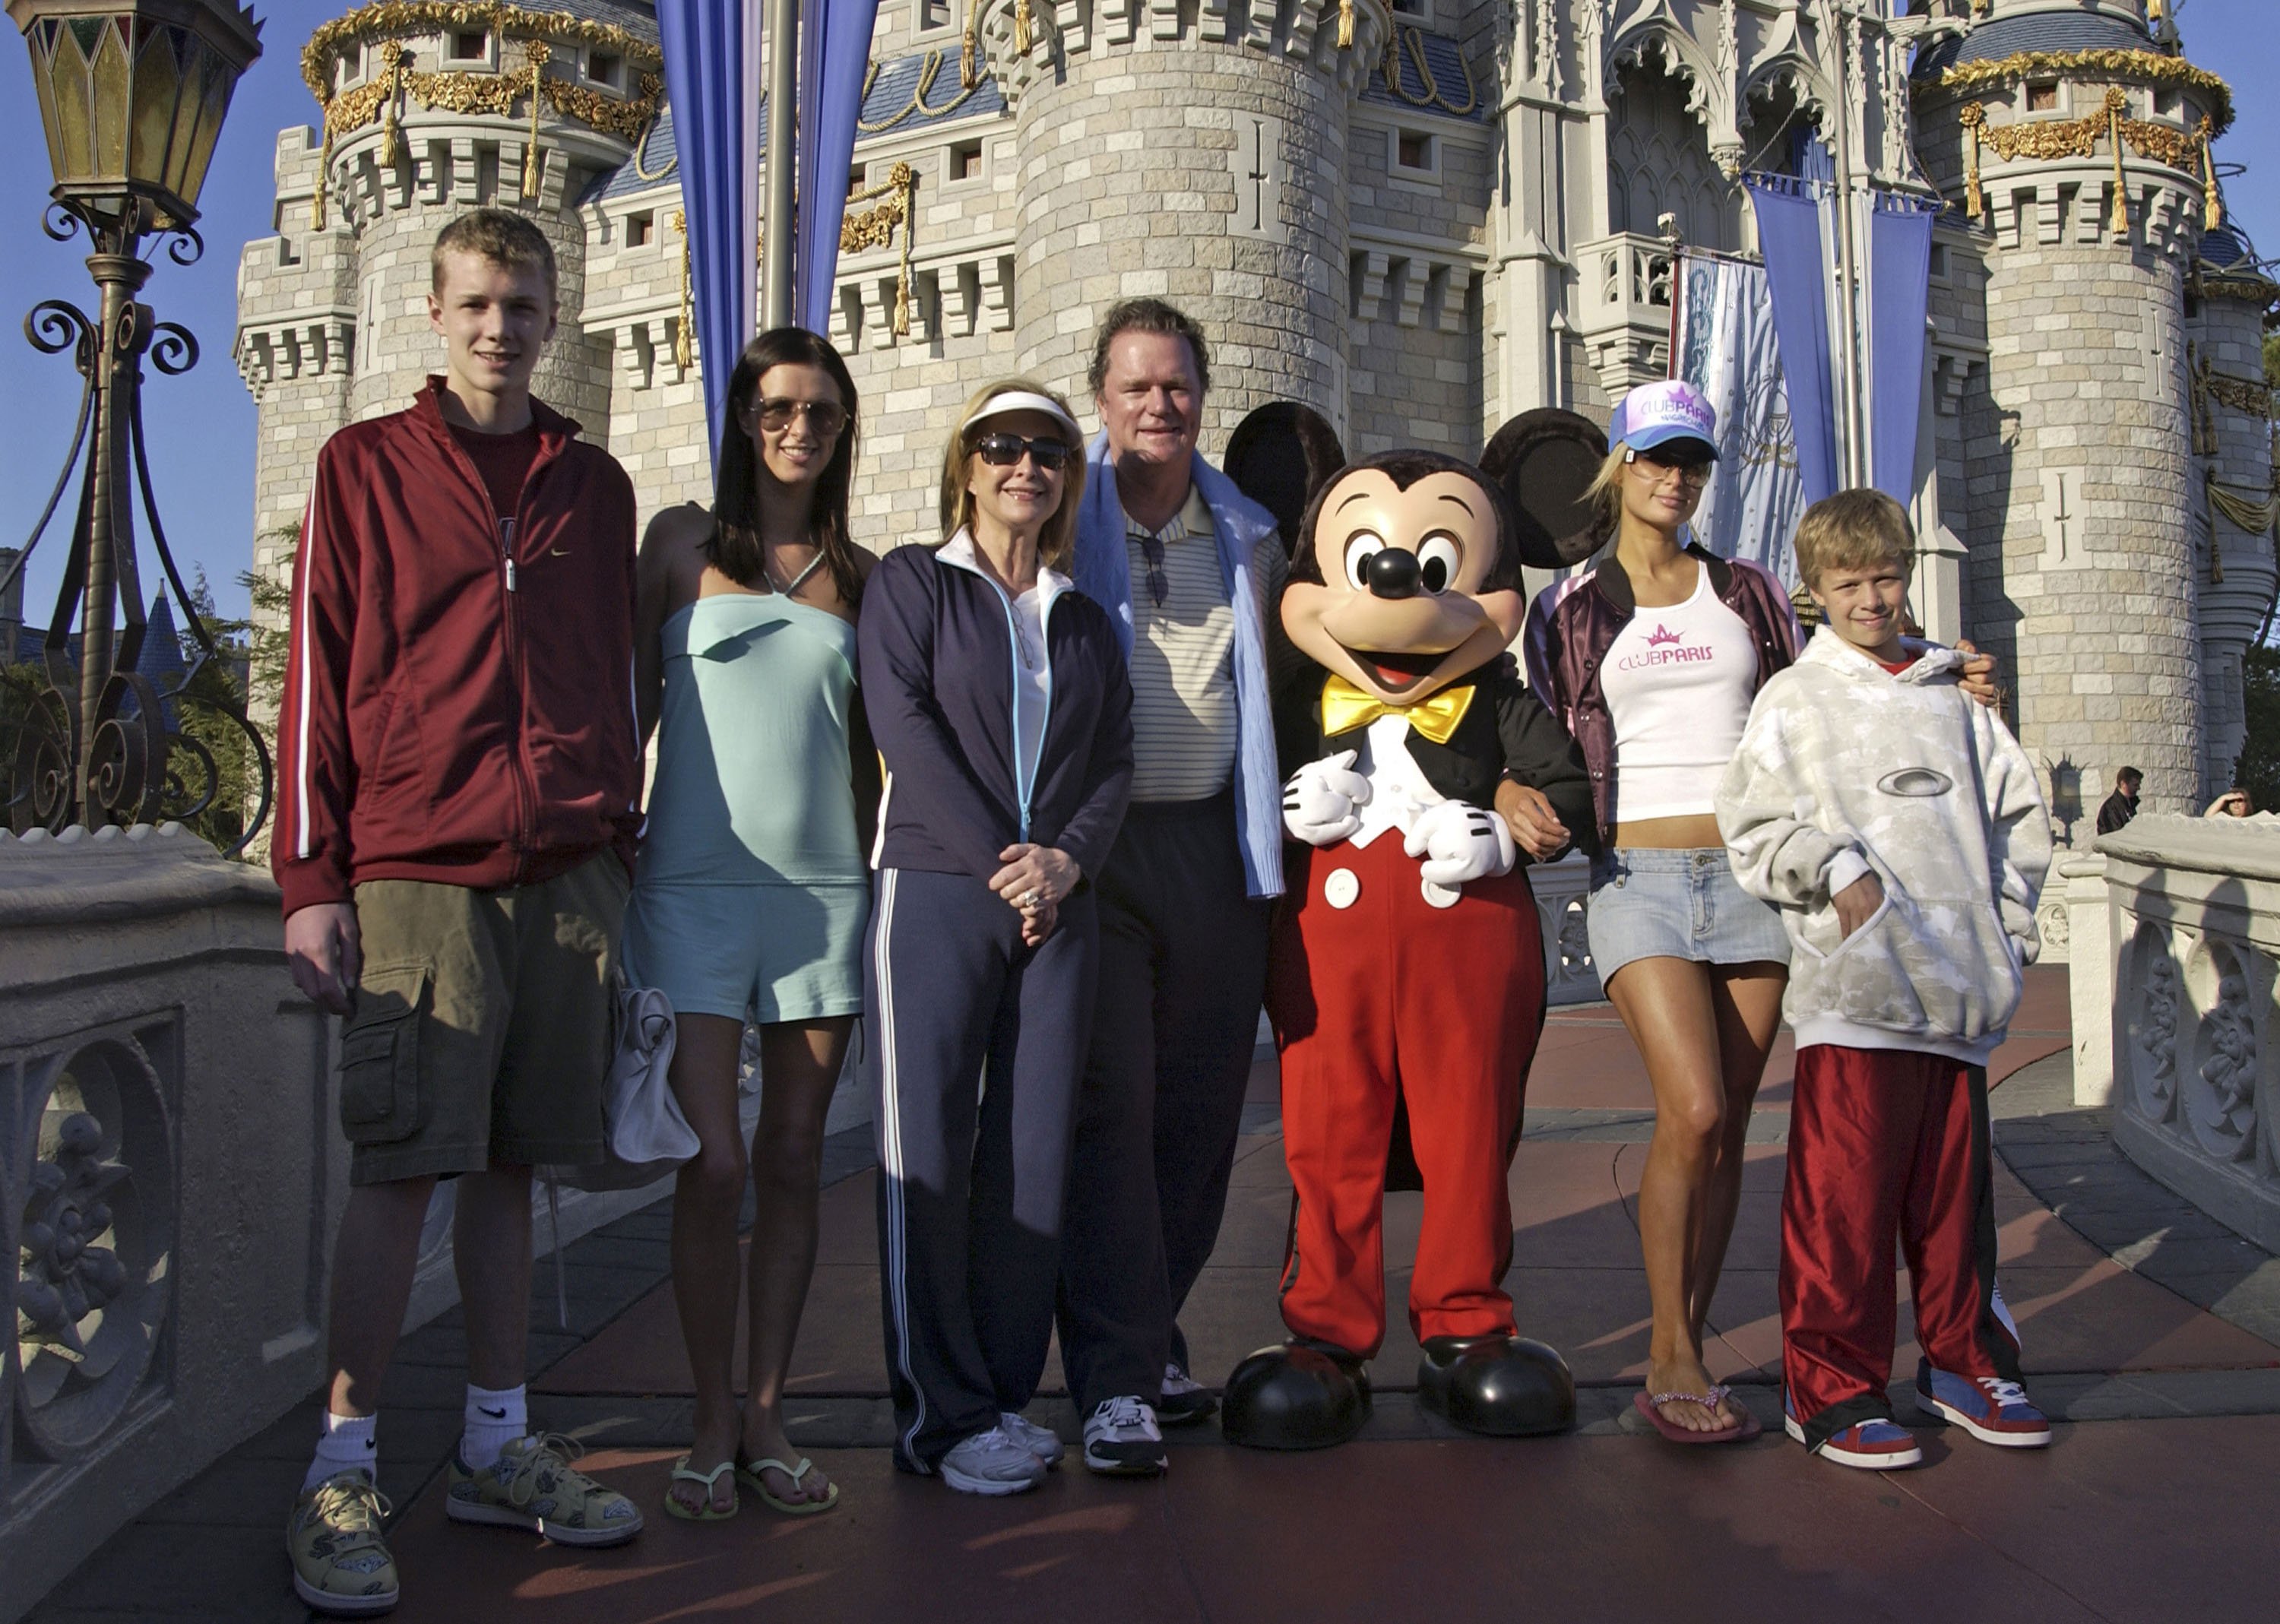 (L-R) Barron Hilton, Nicky Hilton, parents Kathy Hilton and Rick Hilton, Paris Hilton and Conrad Hilton pose with Mickey Mouse at Walt Disney World Resort on February 19, 2005 in Lake Buena Vista, Florida. | Source: Getty Images